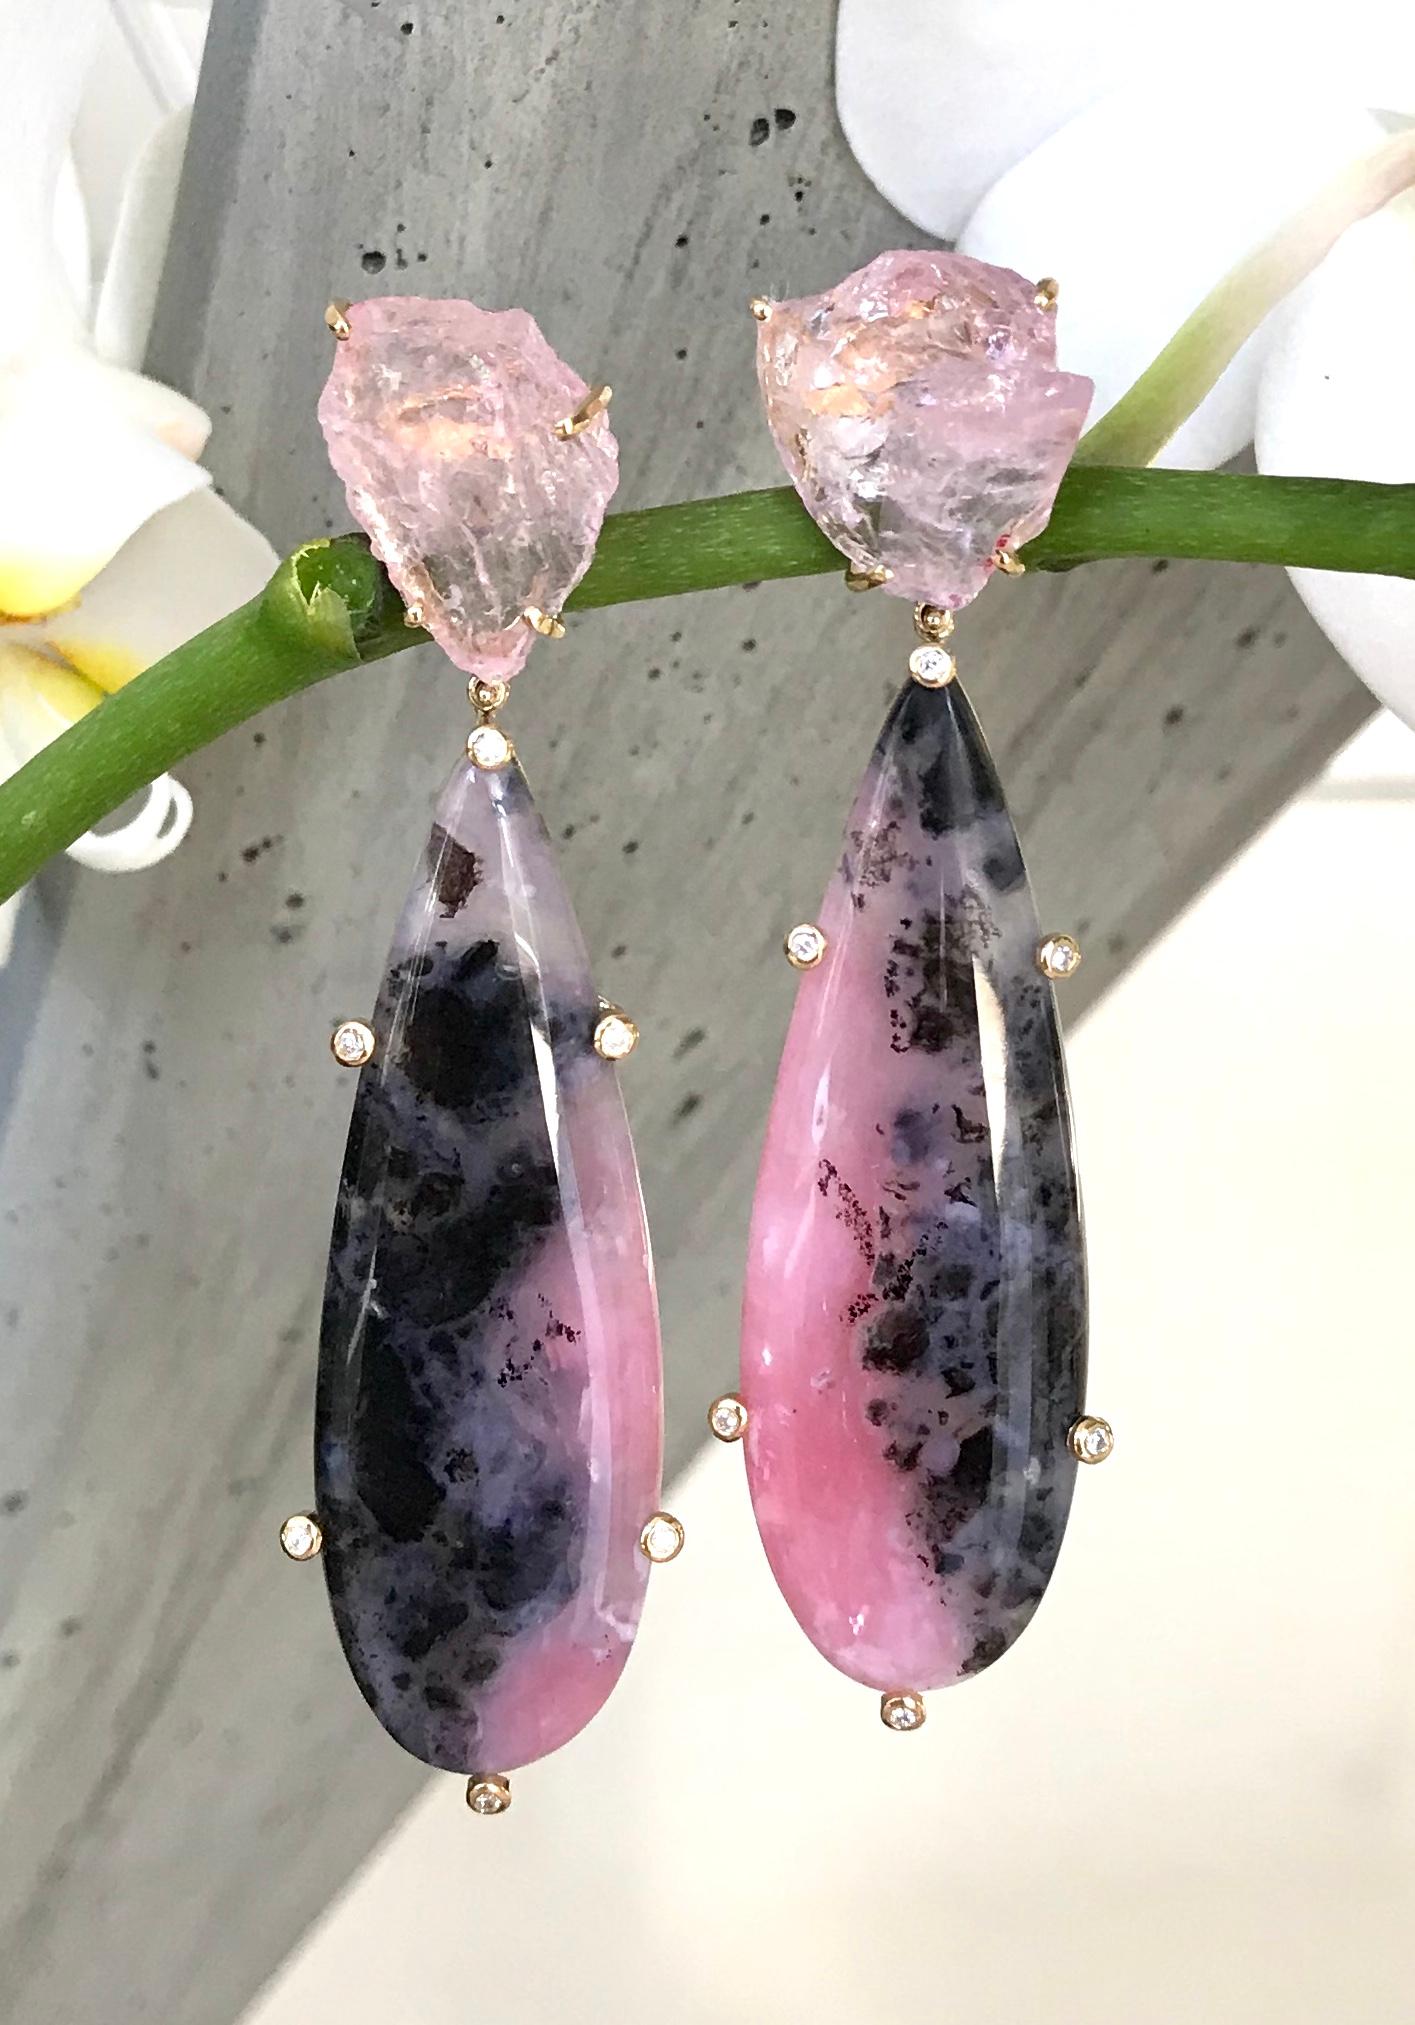 One-of-a-kind dangle earrings of rough pink morganites and cabochon pink opal drops with natural black matrix, accented by white diamonds. Handcrafted in 18 karat yellow gold.

These stunning pink and black earrings make a glamorous statement when